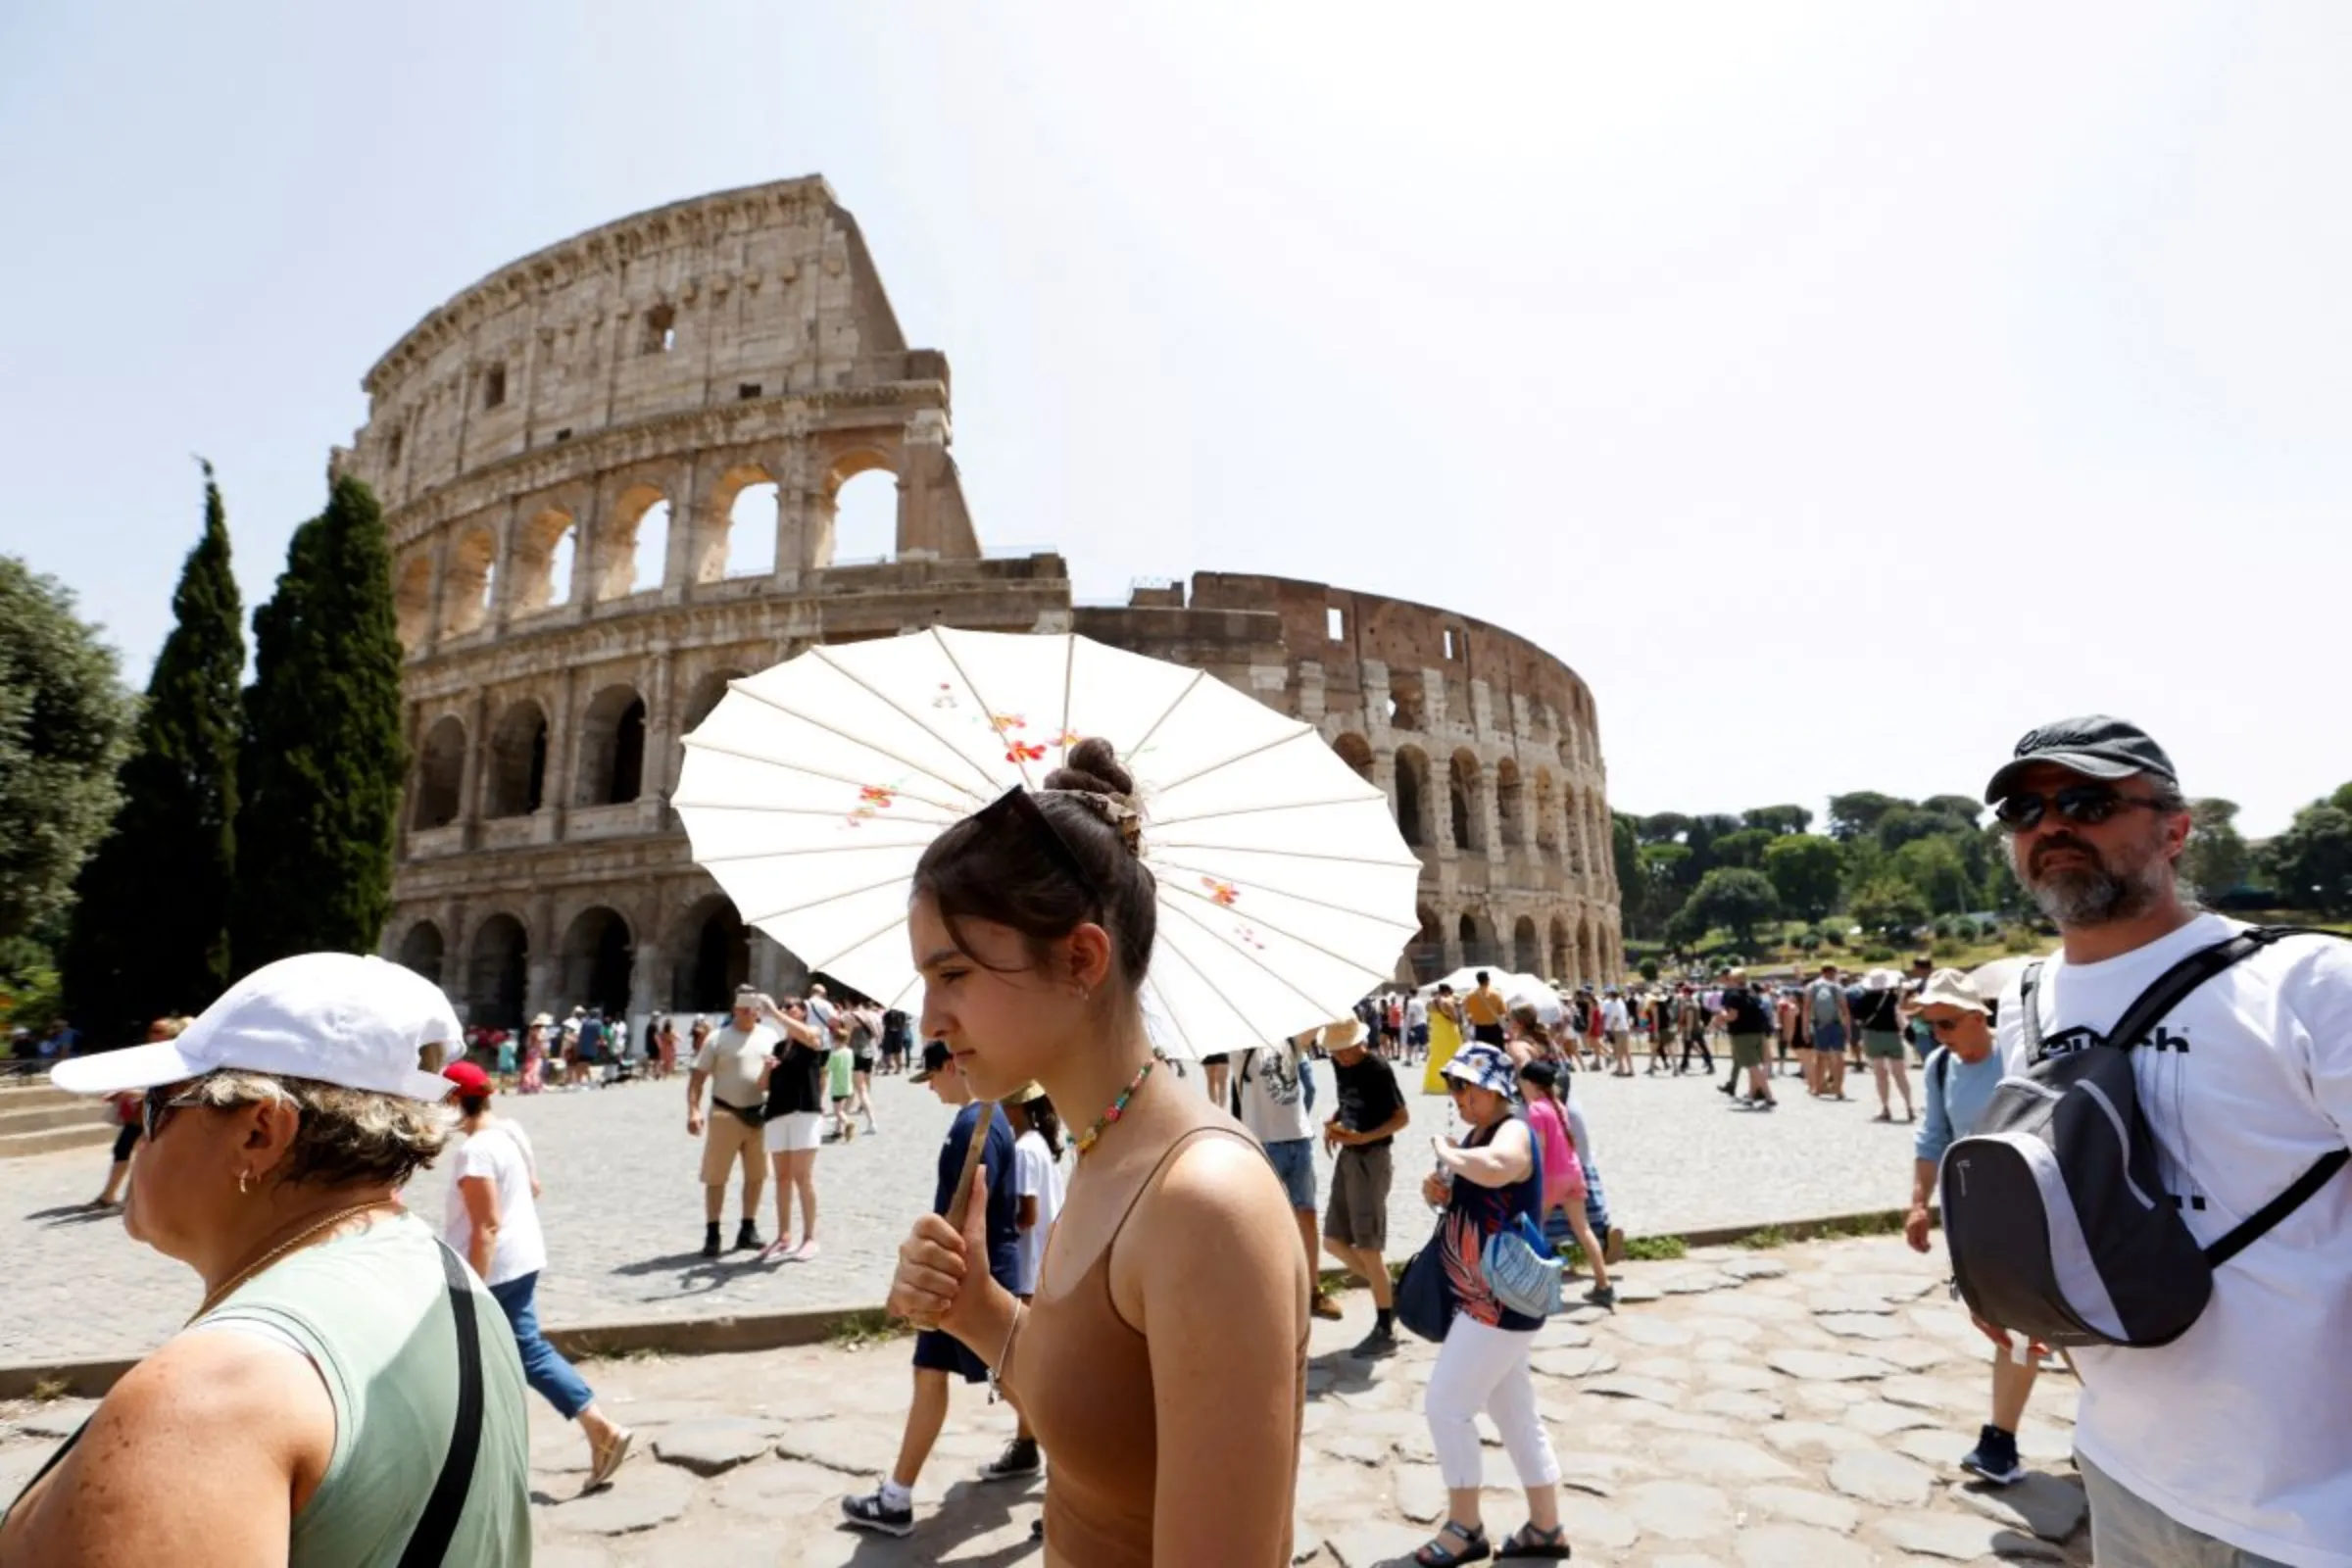 People walk near the Colosseum during a heat wave across Italy as temperatures are expected to rise further in the coming days, in Rome, Italy July 17, 2023